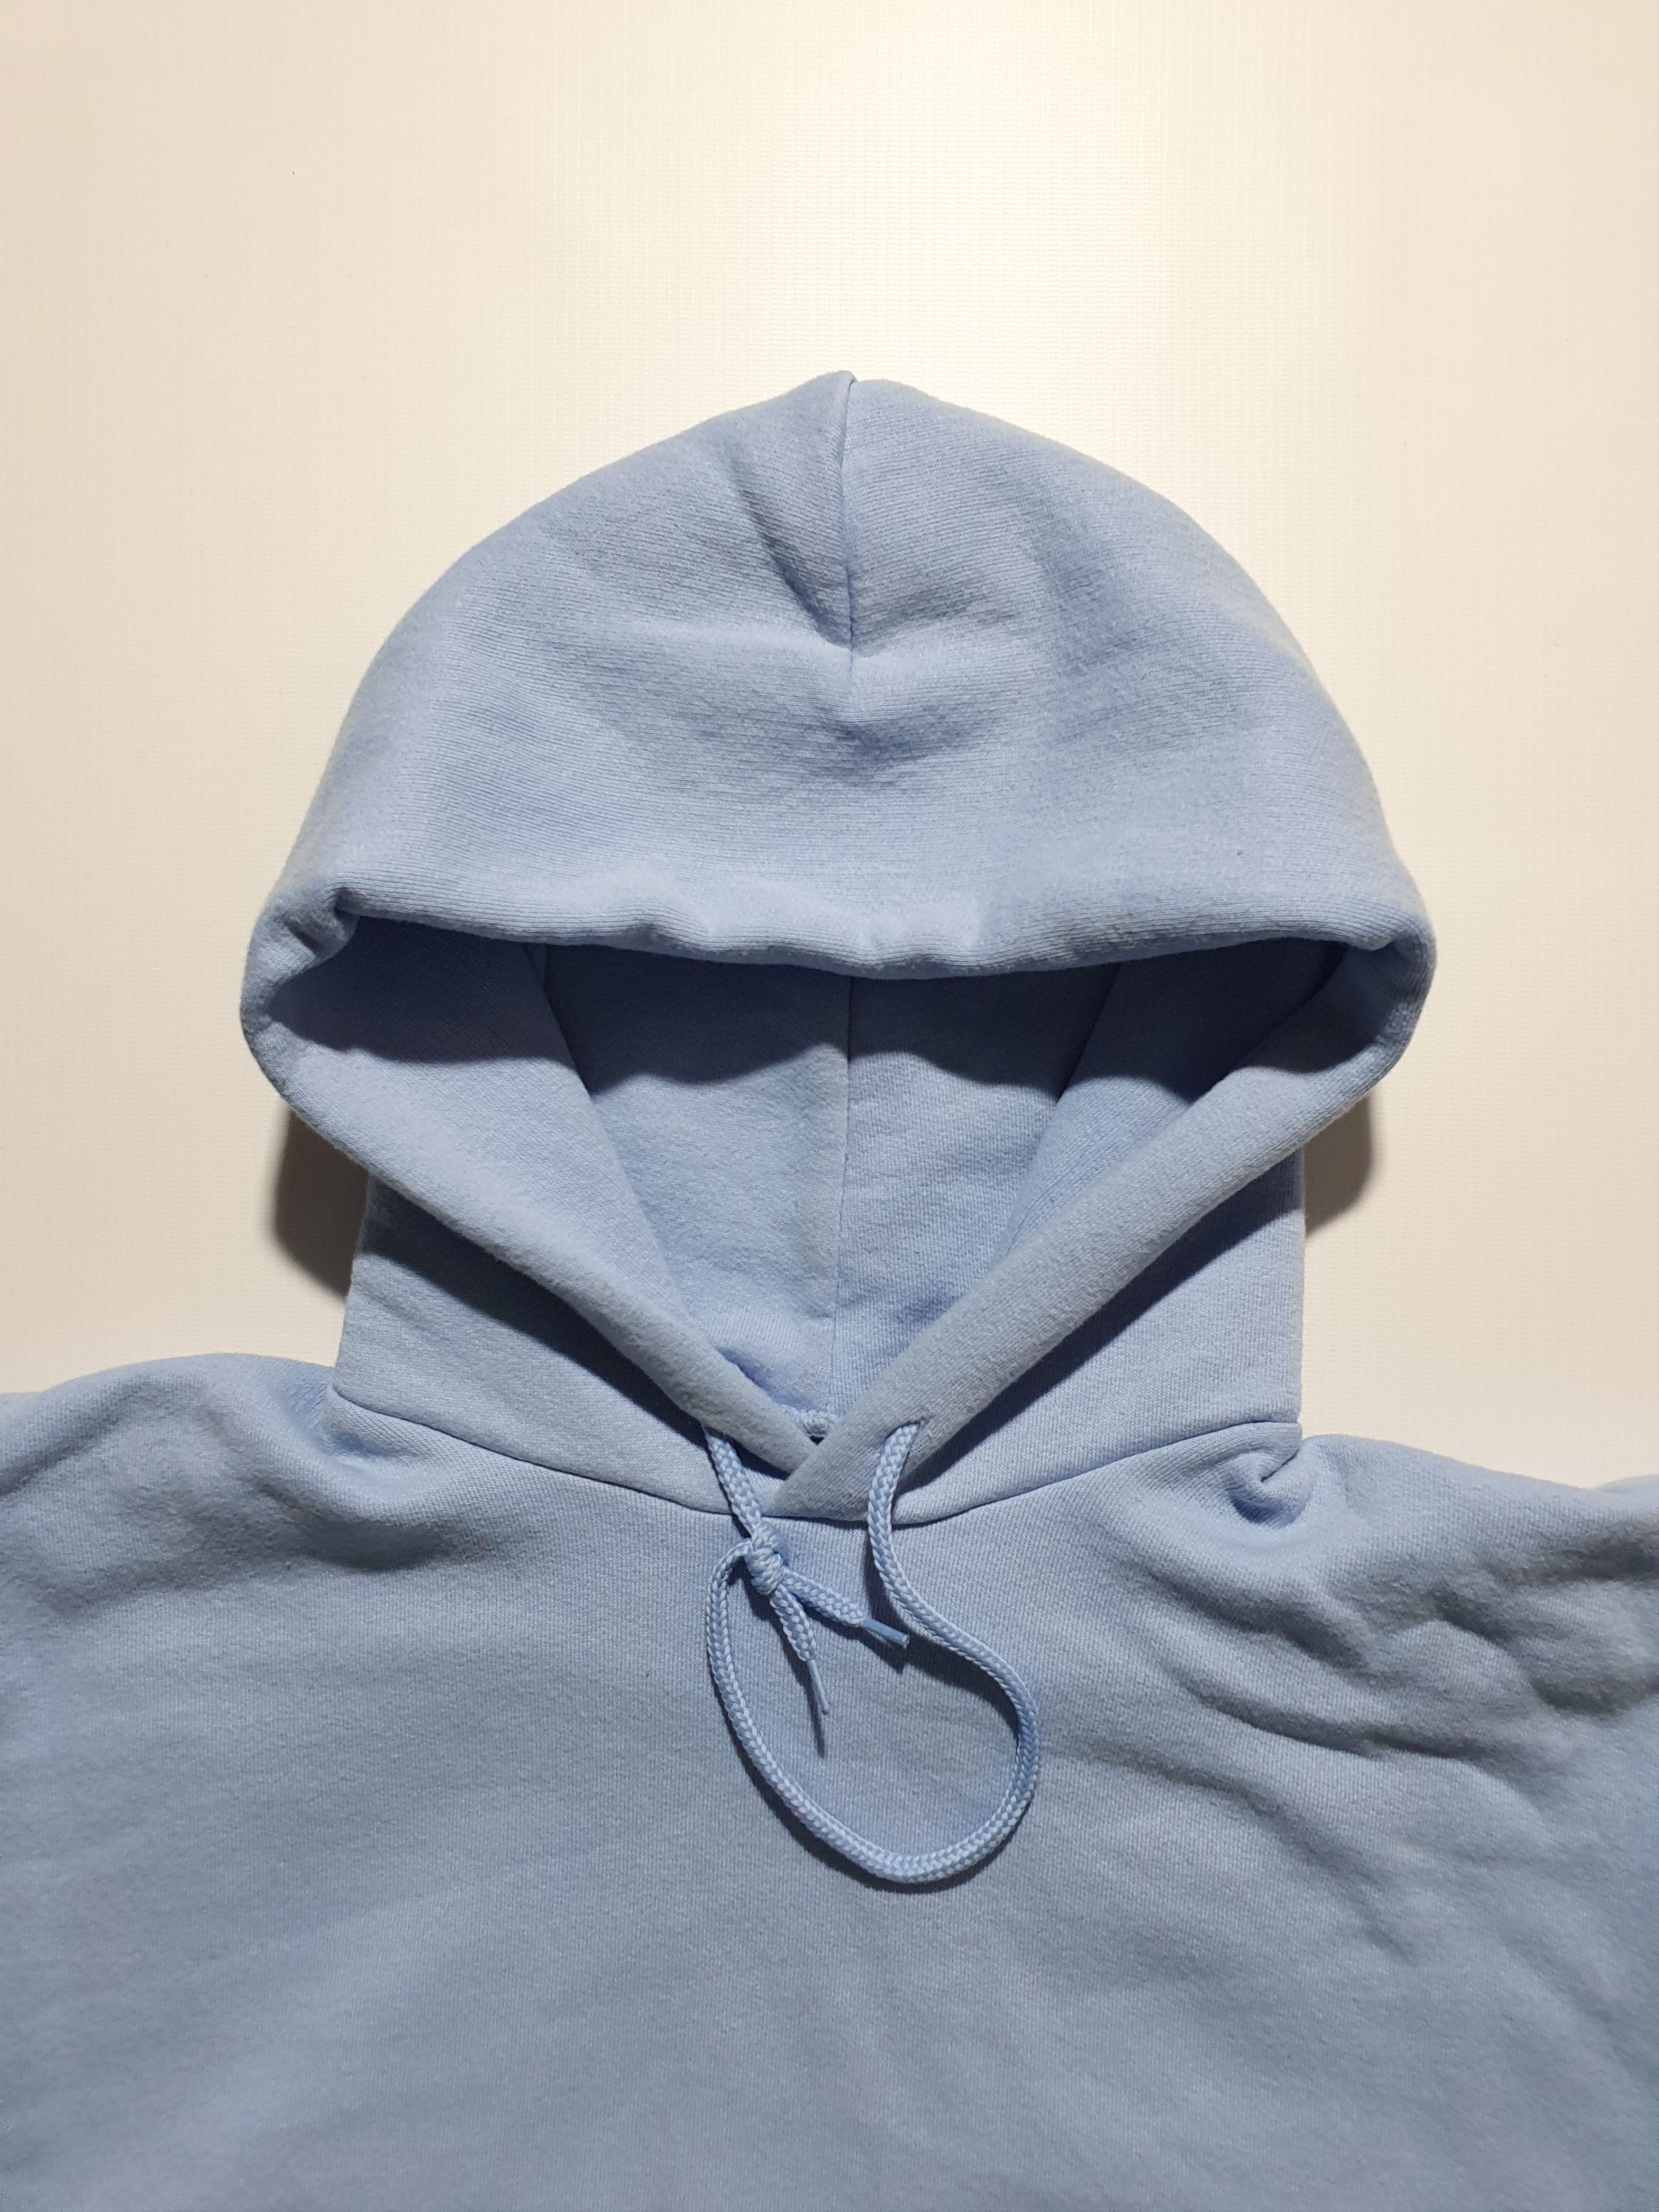 Russell Athletic Rare Russell Baby Blue Hoodie no logo Kanye West Size US L / EU 52-54 / 3 - 8 Thumbnail